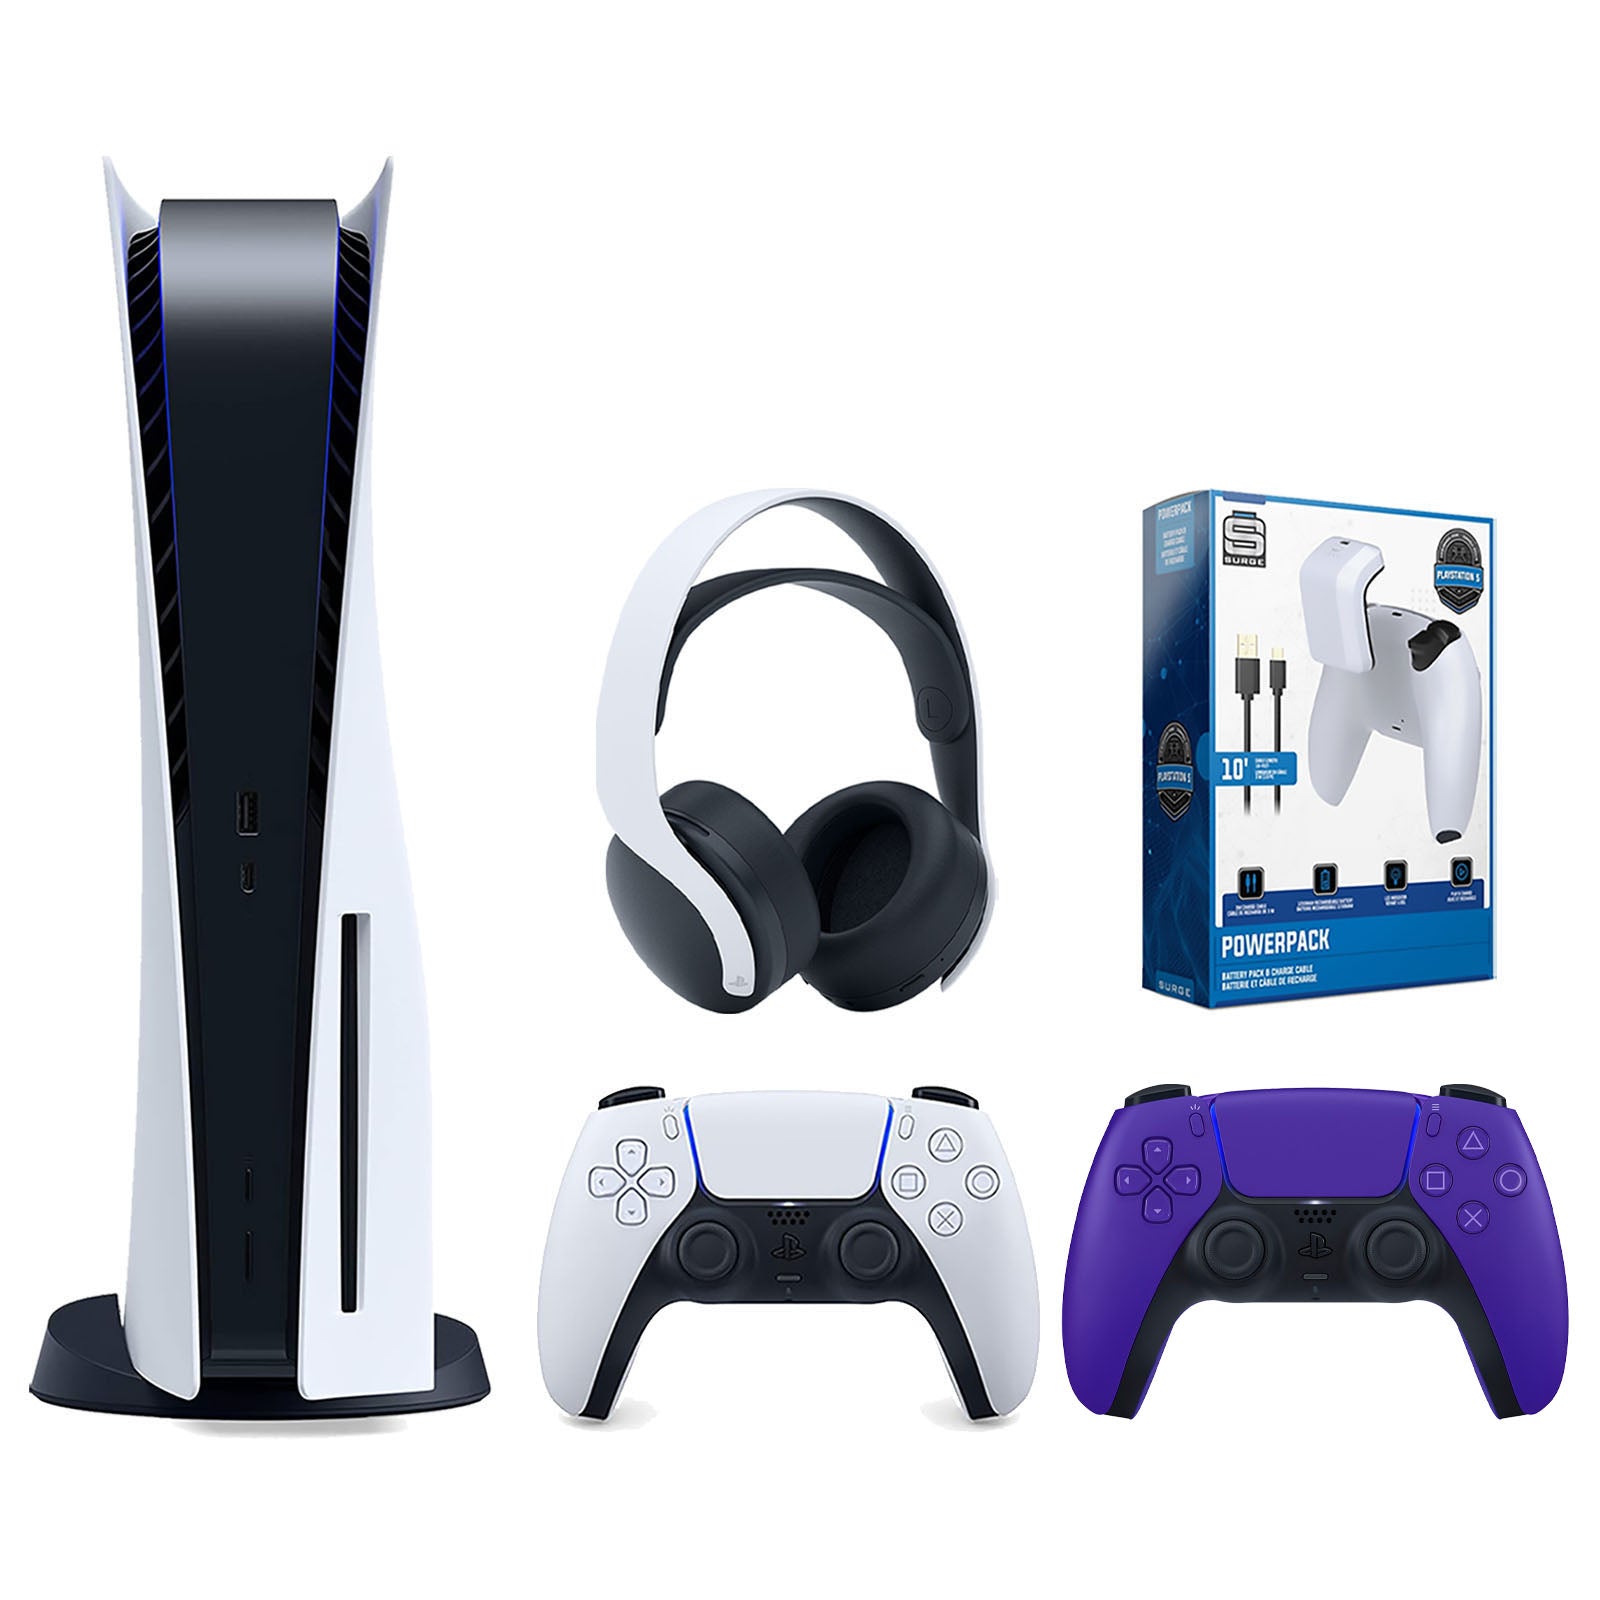 Sony Playstation 5 Disc Version Console with Extra Purple Controller, White PULSE 3D Headset and Surge PowerPack Battery Pack & Charge Cable Bundle - Pro-Distributing